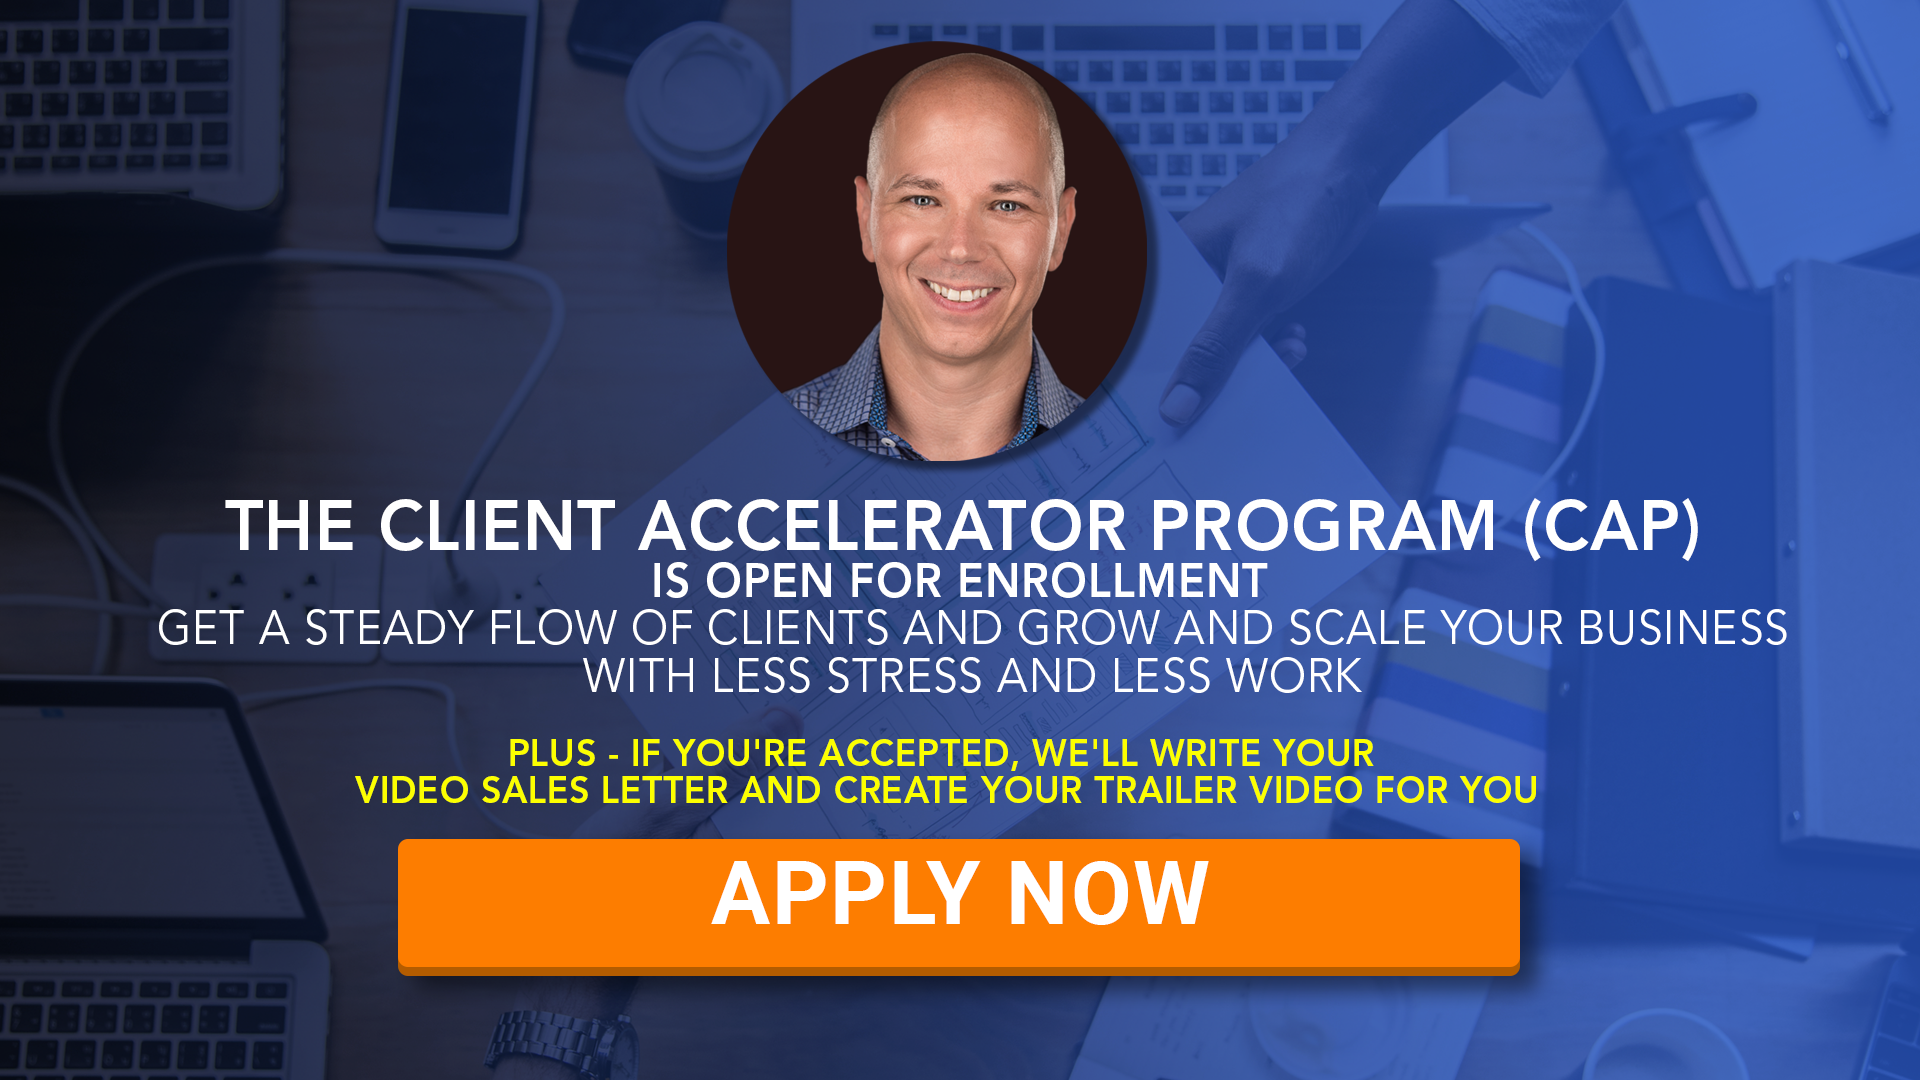 Apply Now for the Client Accelerator Program with Dan Kuschell